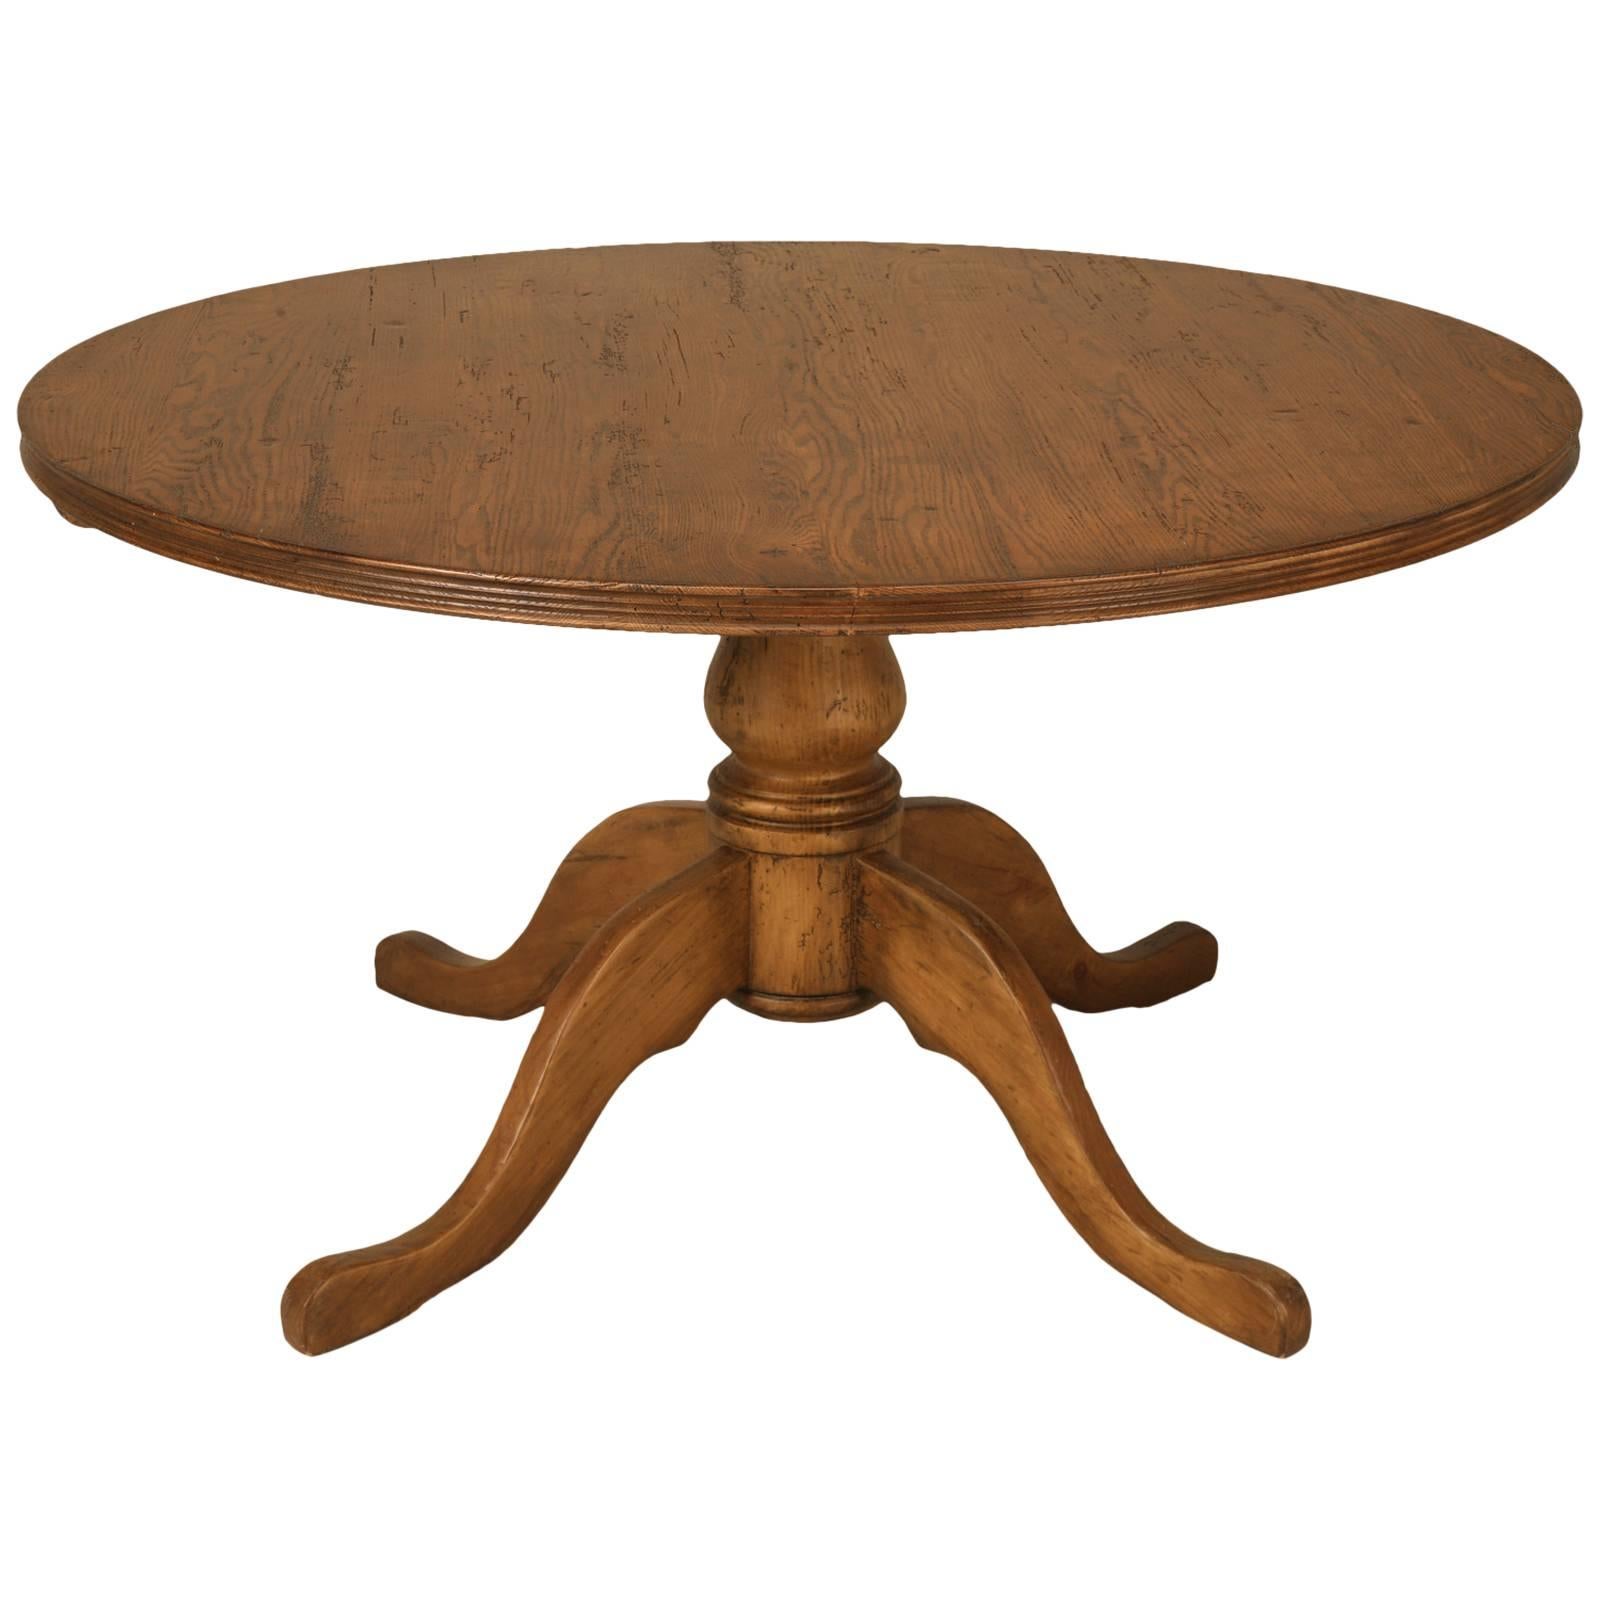 Handcrafted Round Oak Dining Table Available in Different Size Made in Chicago For Sale